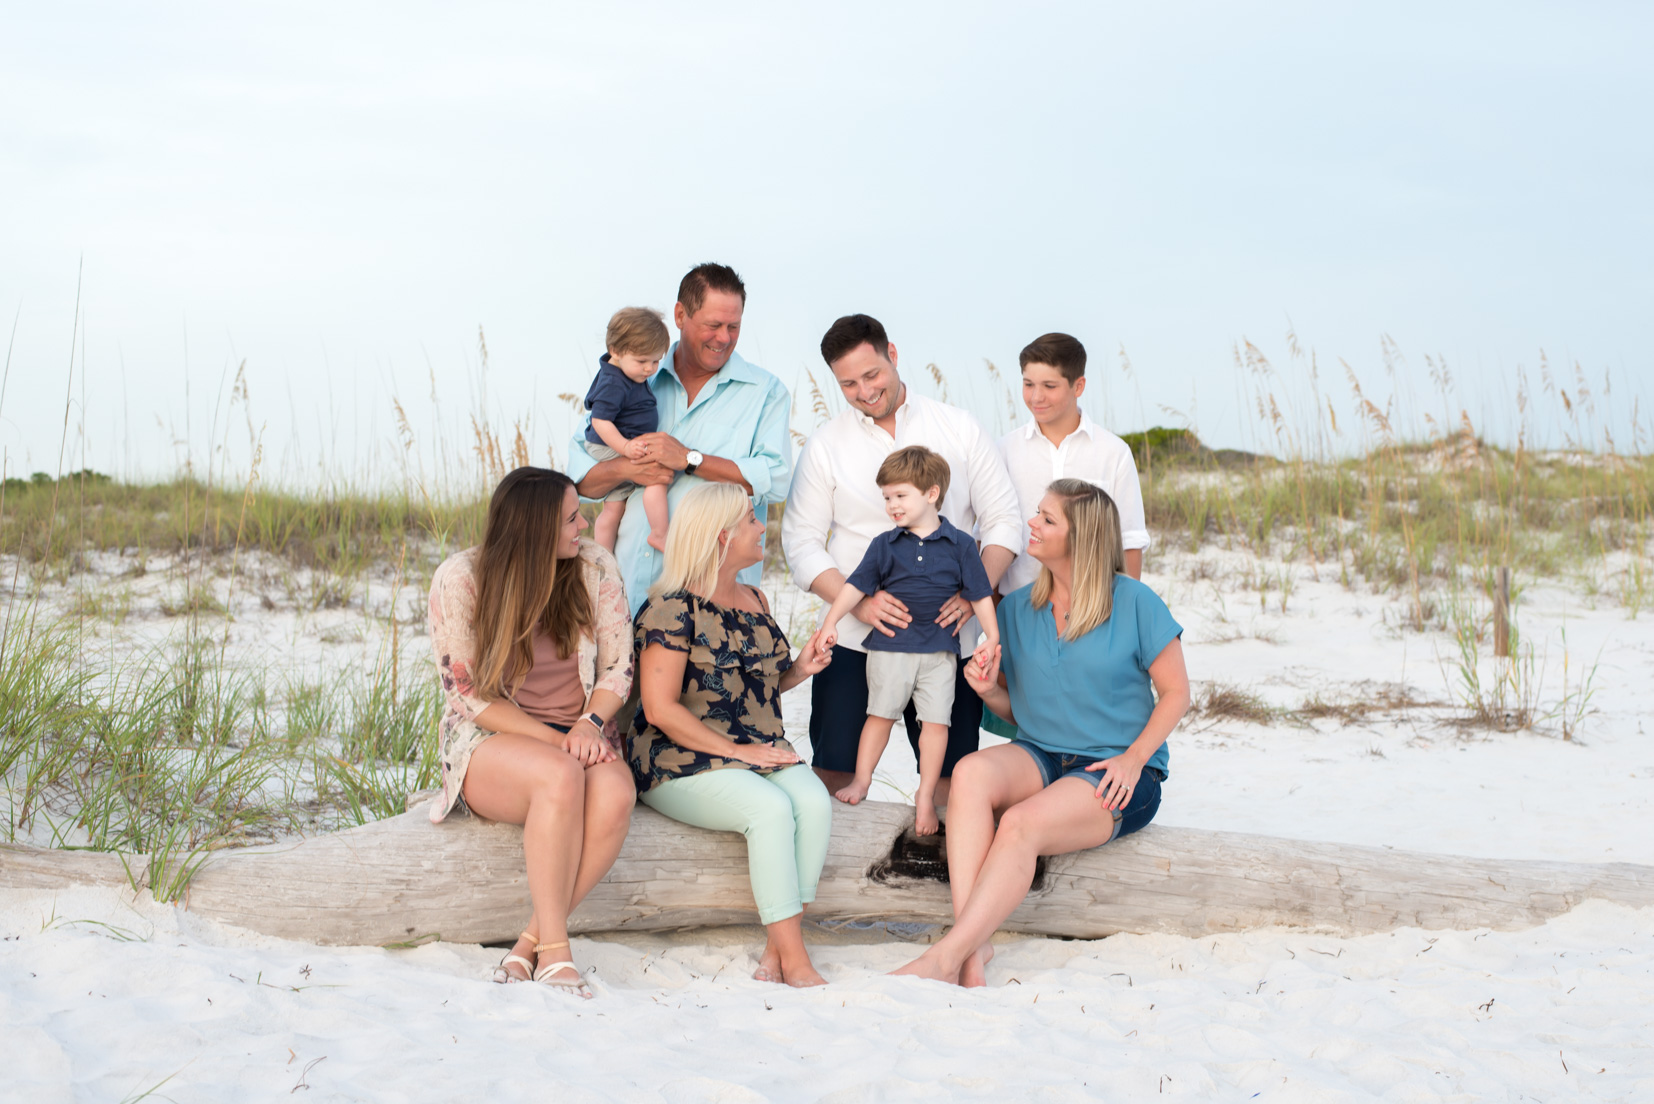 DSC_3366.jpg Panama City beach family portrait photo session just before sunset by Holly Naughton Photography